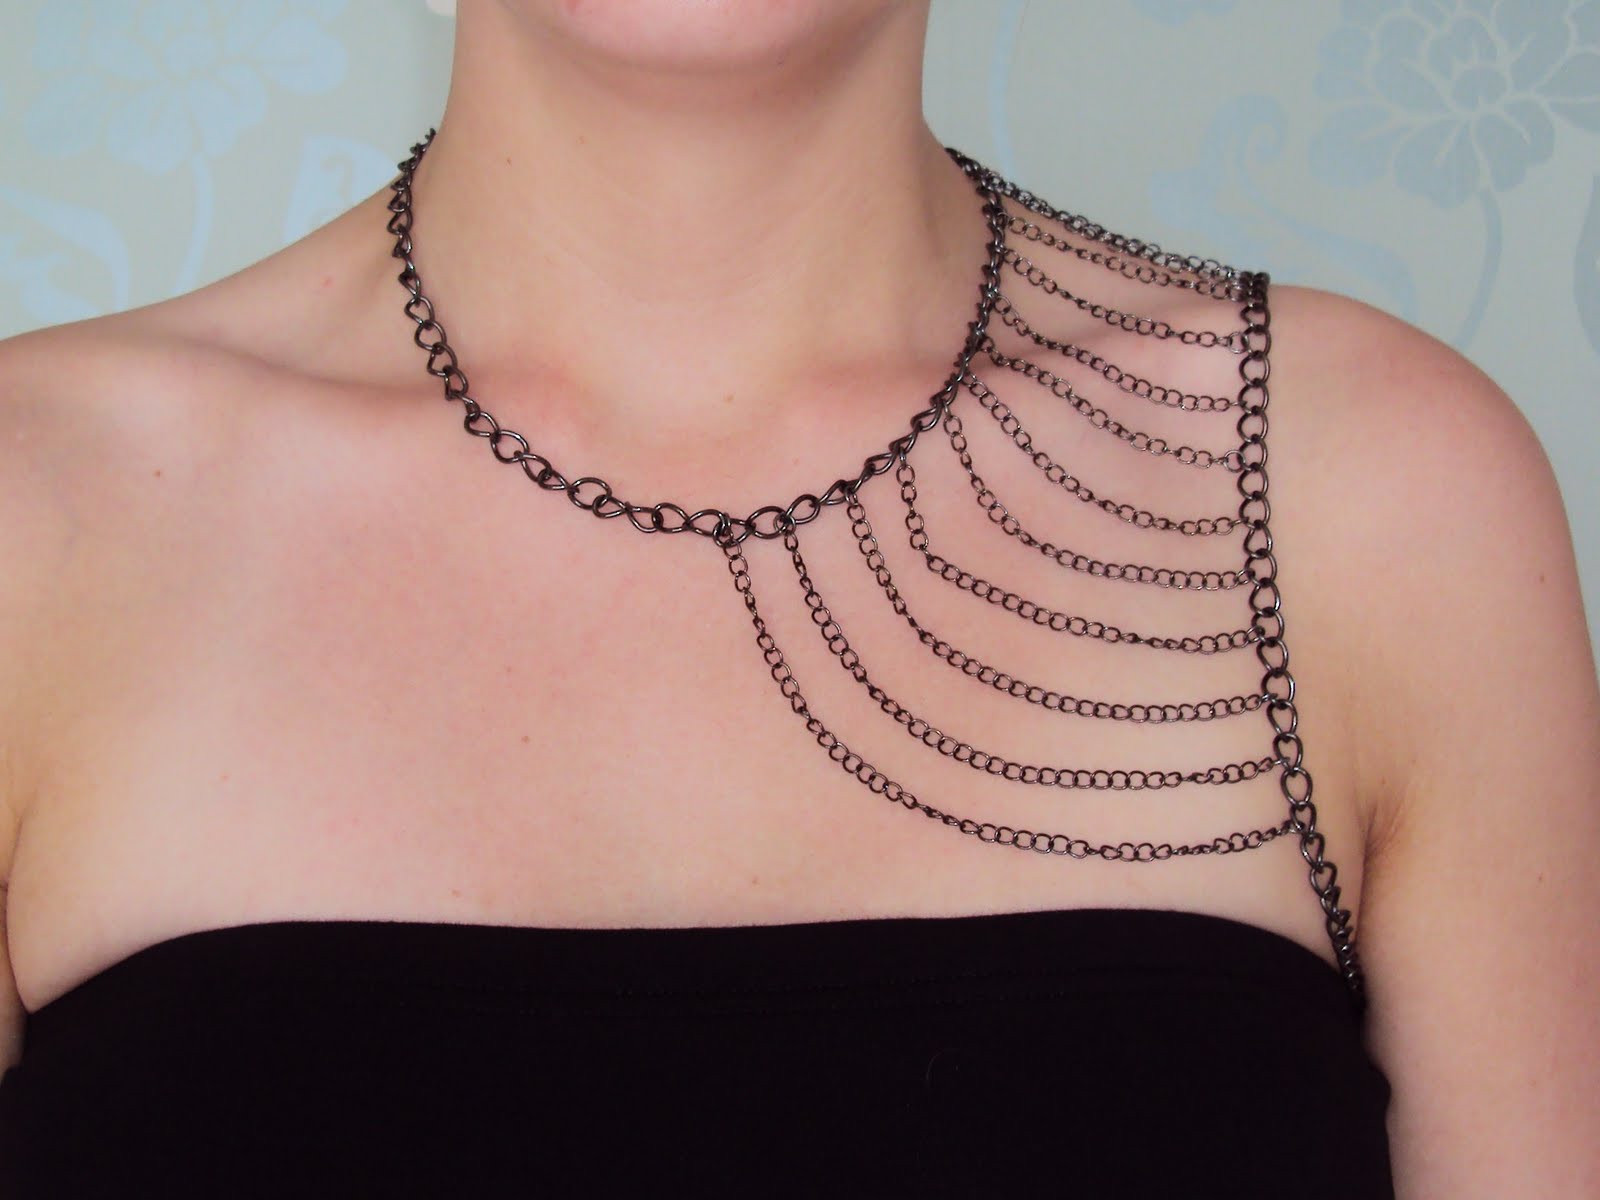 How To Make A Body Chain